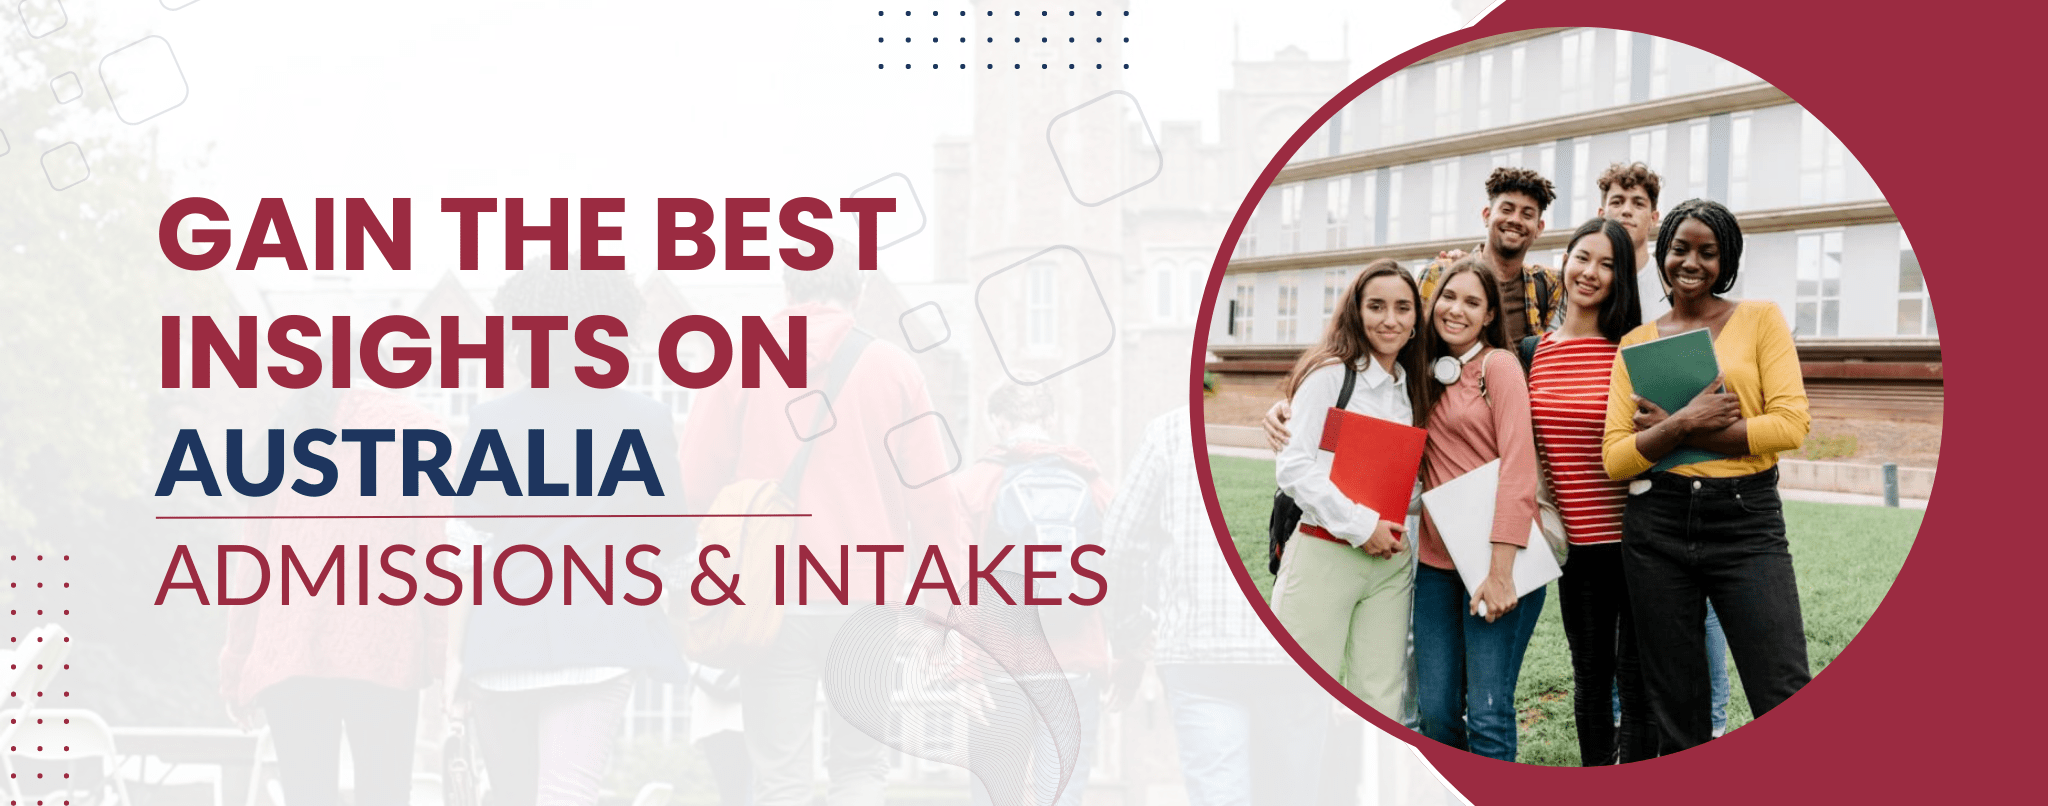 Gain the Best Insights on Australia Admissions & Intakes